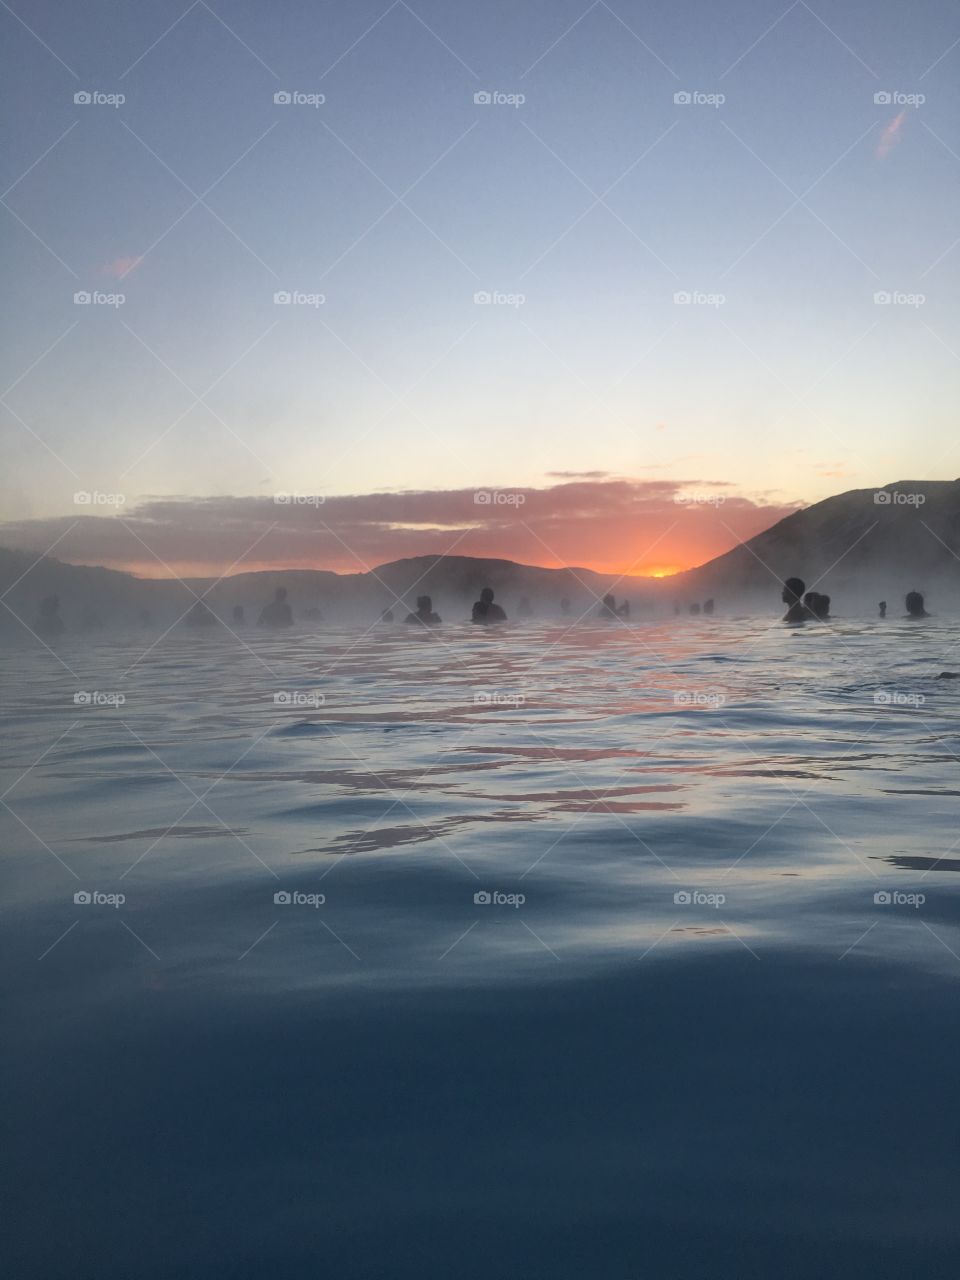 View of a blue lagoon with people in Iceland